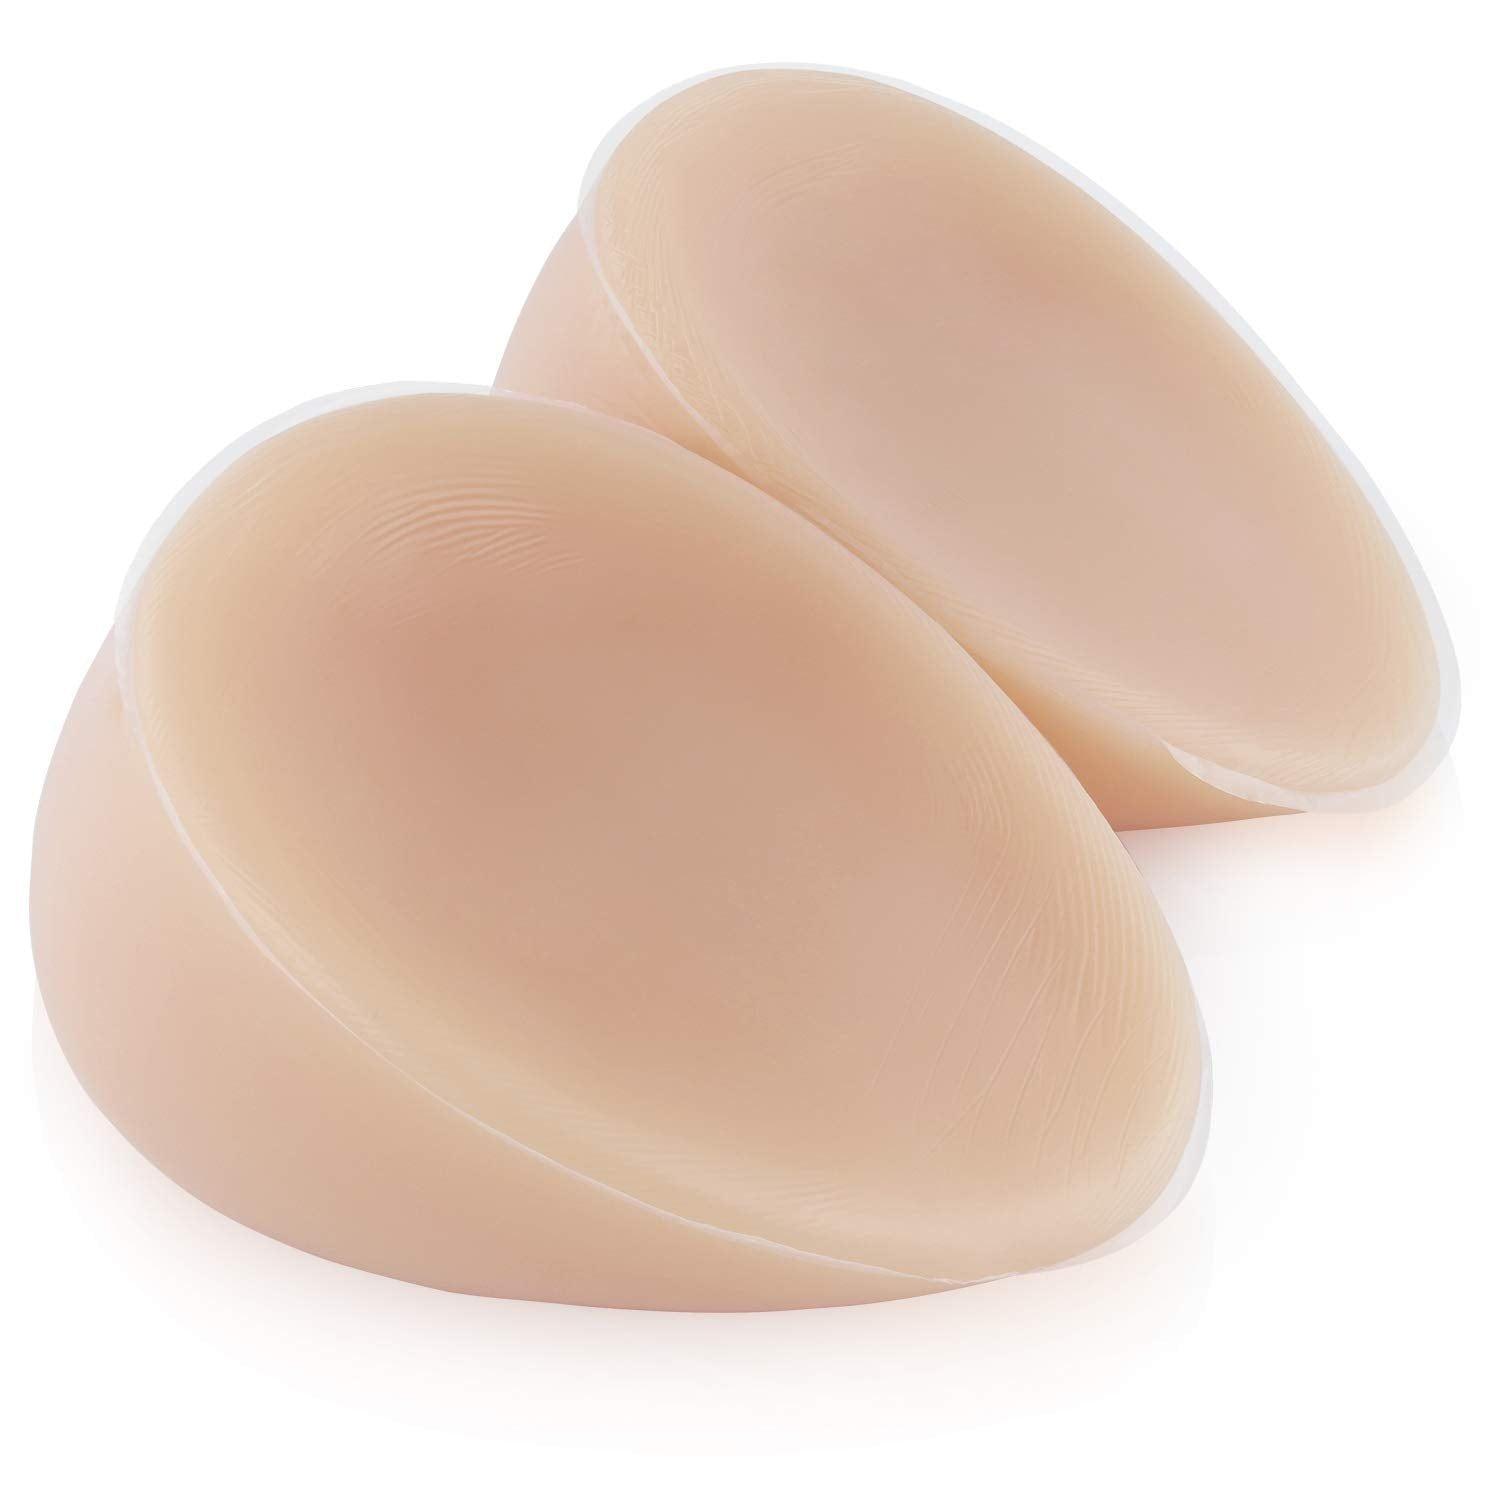 Vollence B Cup Silicone Breast Forms Fake Boobs Concave Bra Pad Mastectomy Transgender Cosplay Crossdresser- Suntan 2